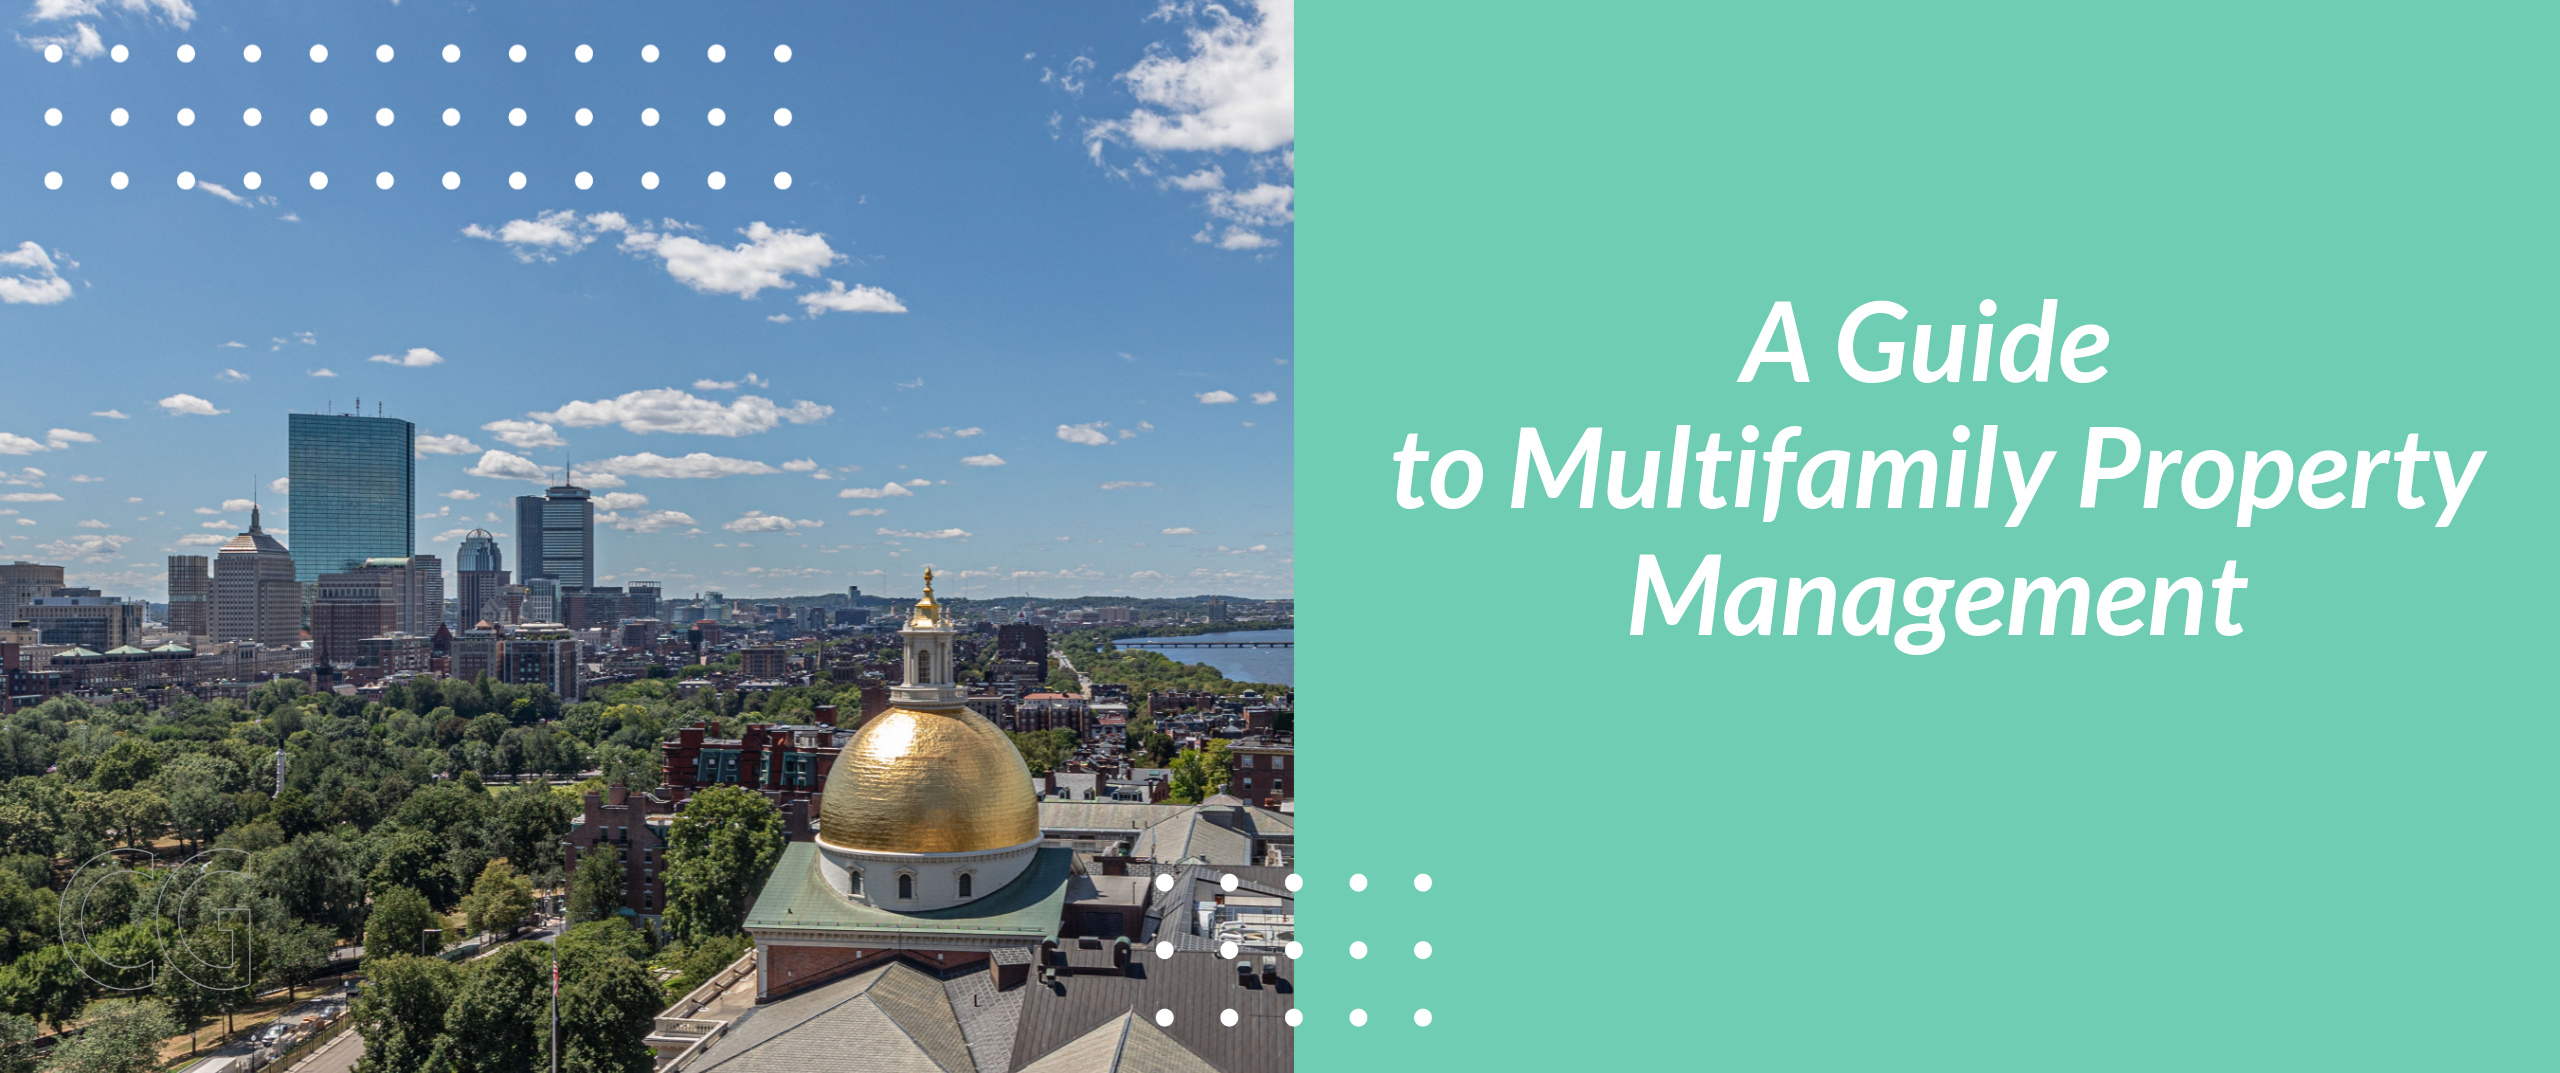 A Guide to Multifamily Property Management in Boston